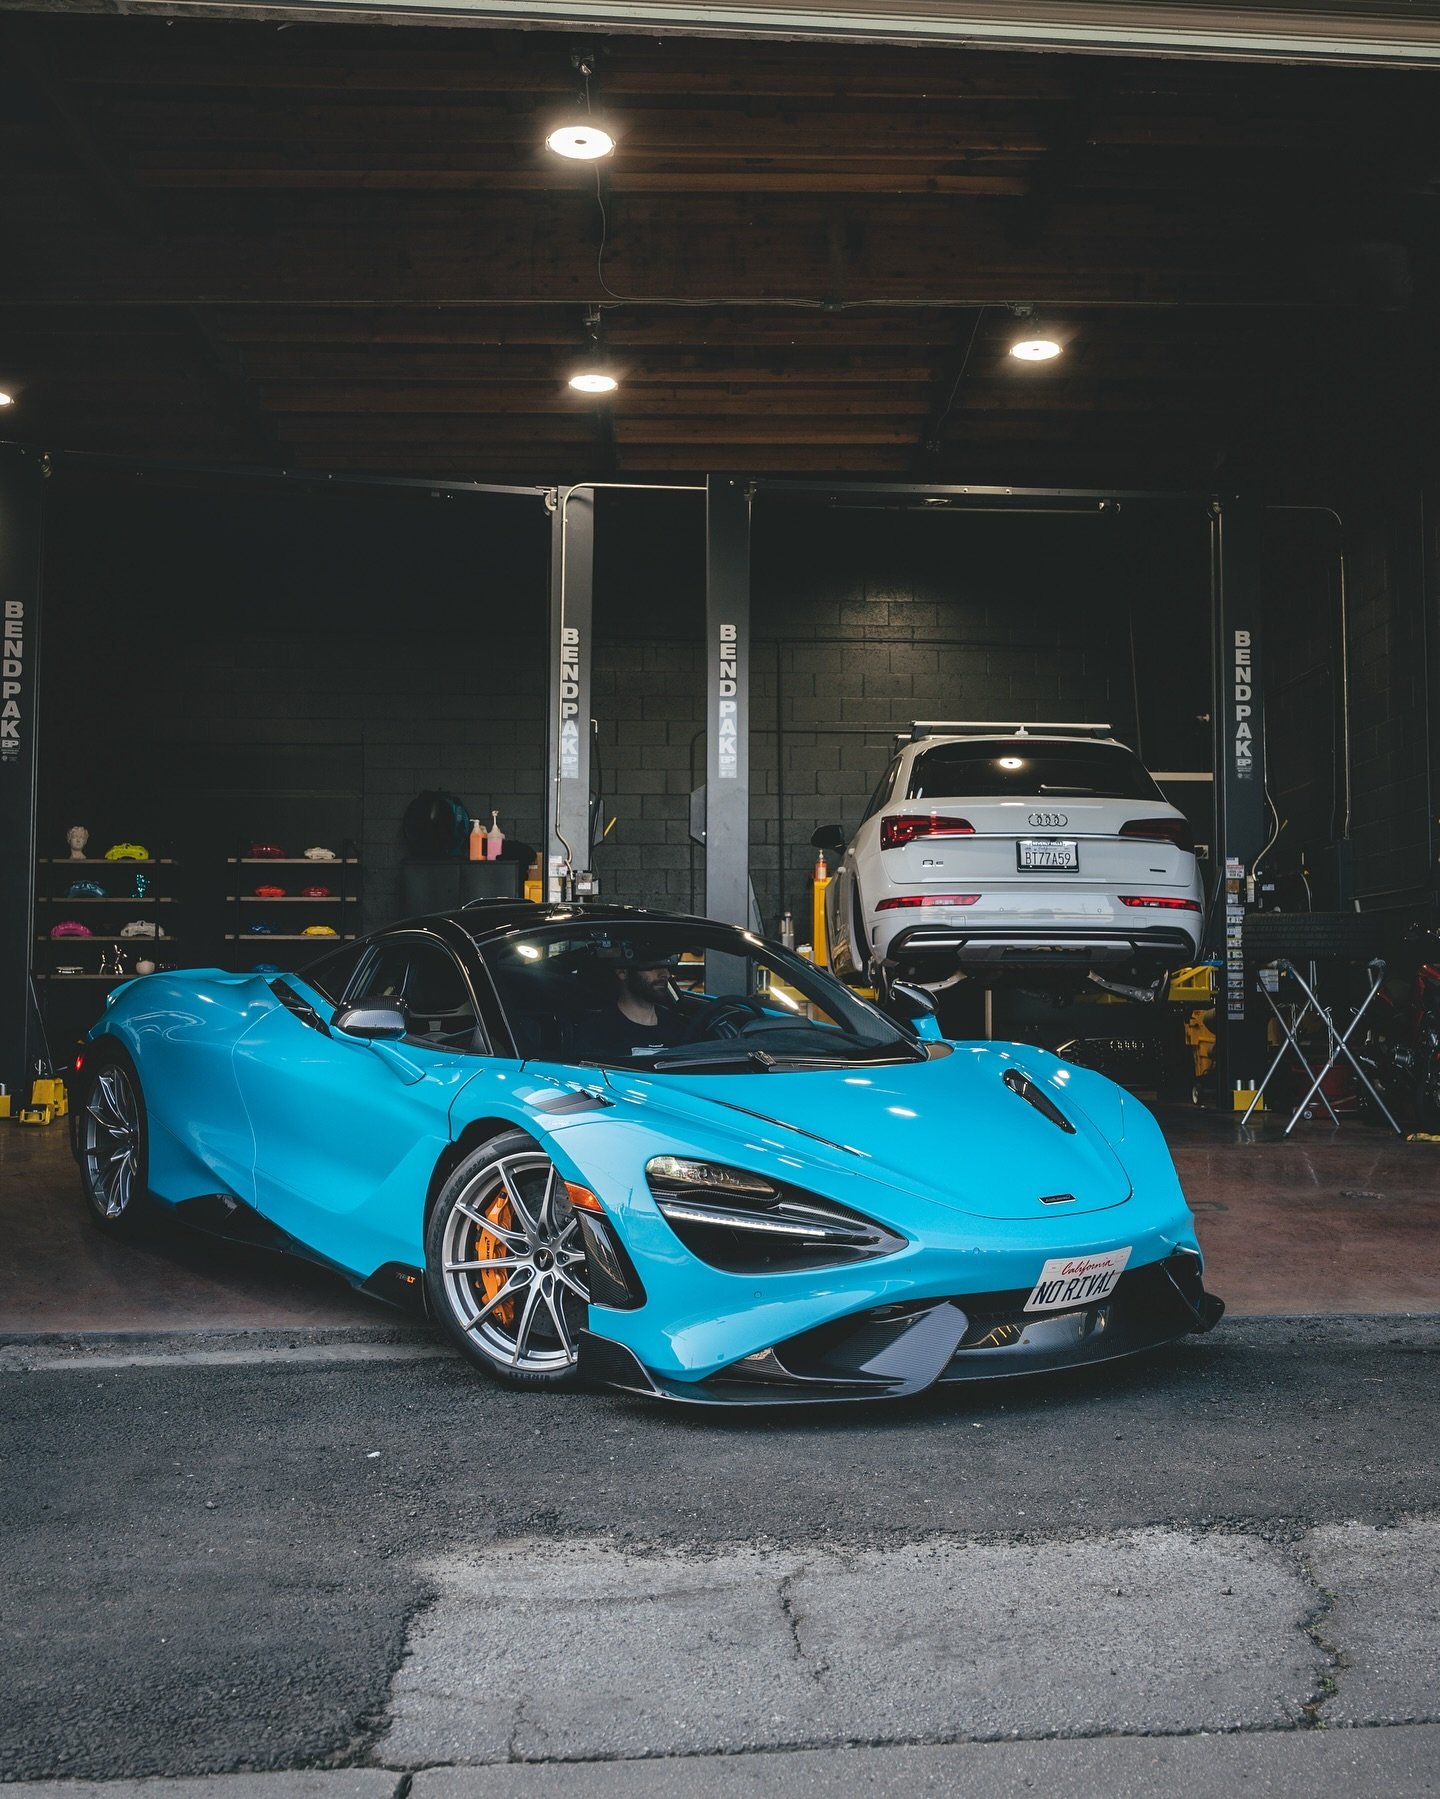 Best color for the 765LT? 

▪️▪️▪️▪️▪️▪️▪️▪️▪️▪️▪️▪️▪️▪️▪️▪️▪️▪️ ▪️ ▪️ ▪️ ▪️
Located in Reseda, we offer 24/7 assistance with collision incidents, and some mobile services as well. Contact us today for your quote!

We service LA and surrounding areas